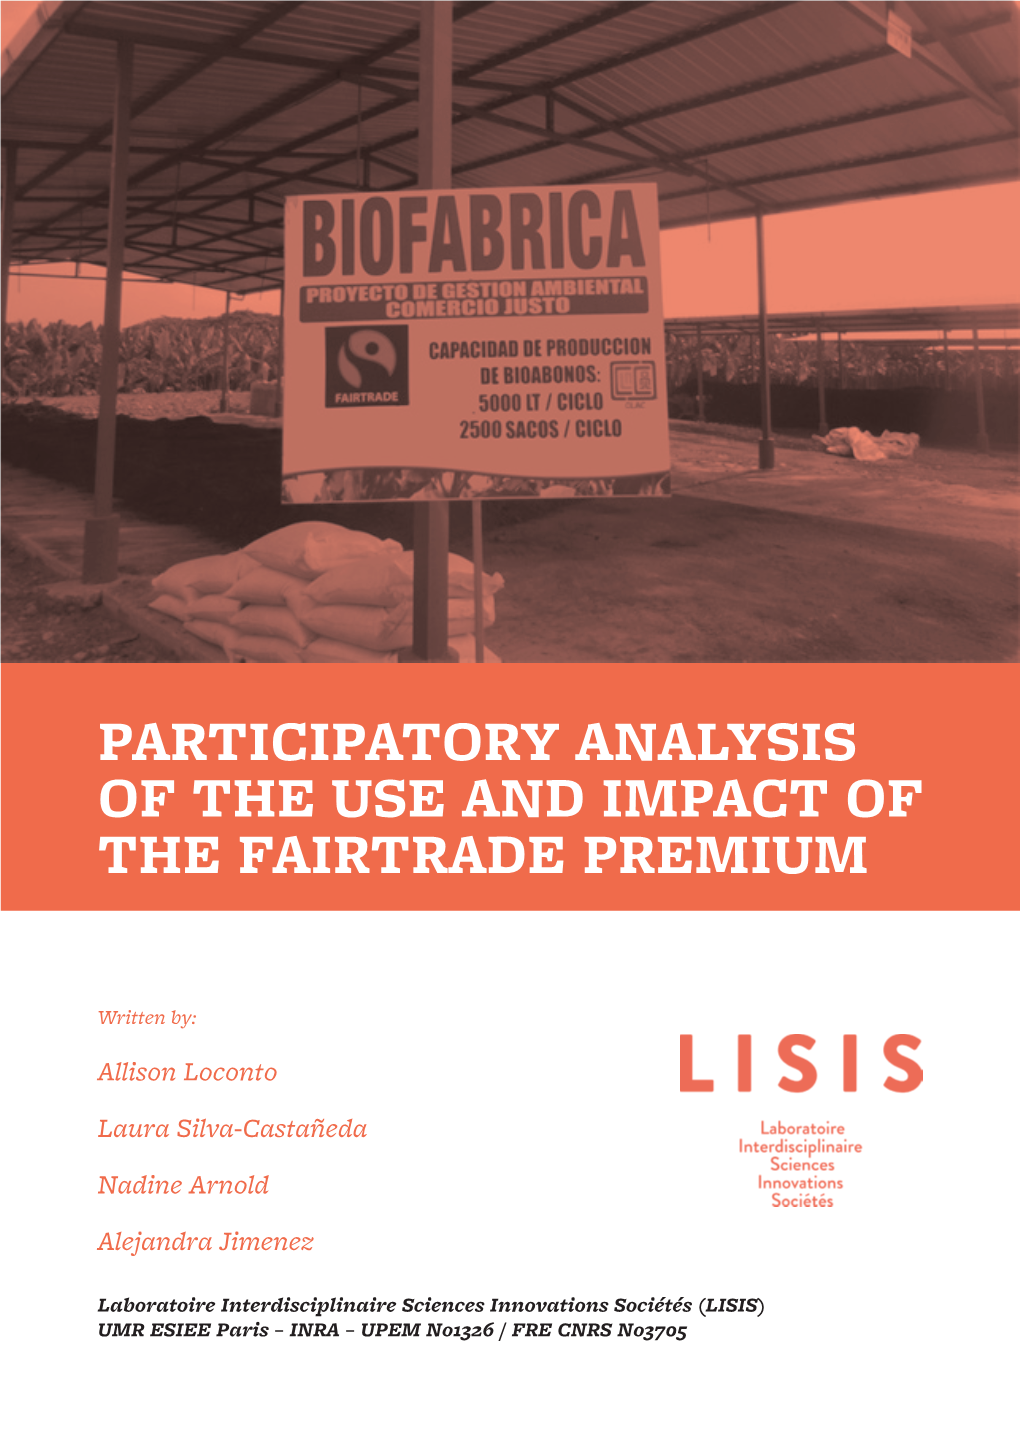 Participatory Analysis of the Use and Impact of the Fairtrade Premium